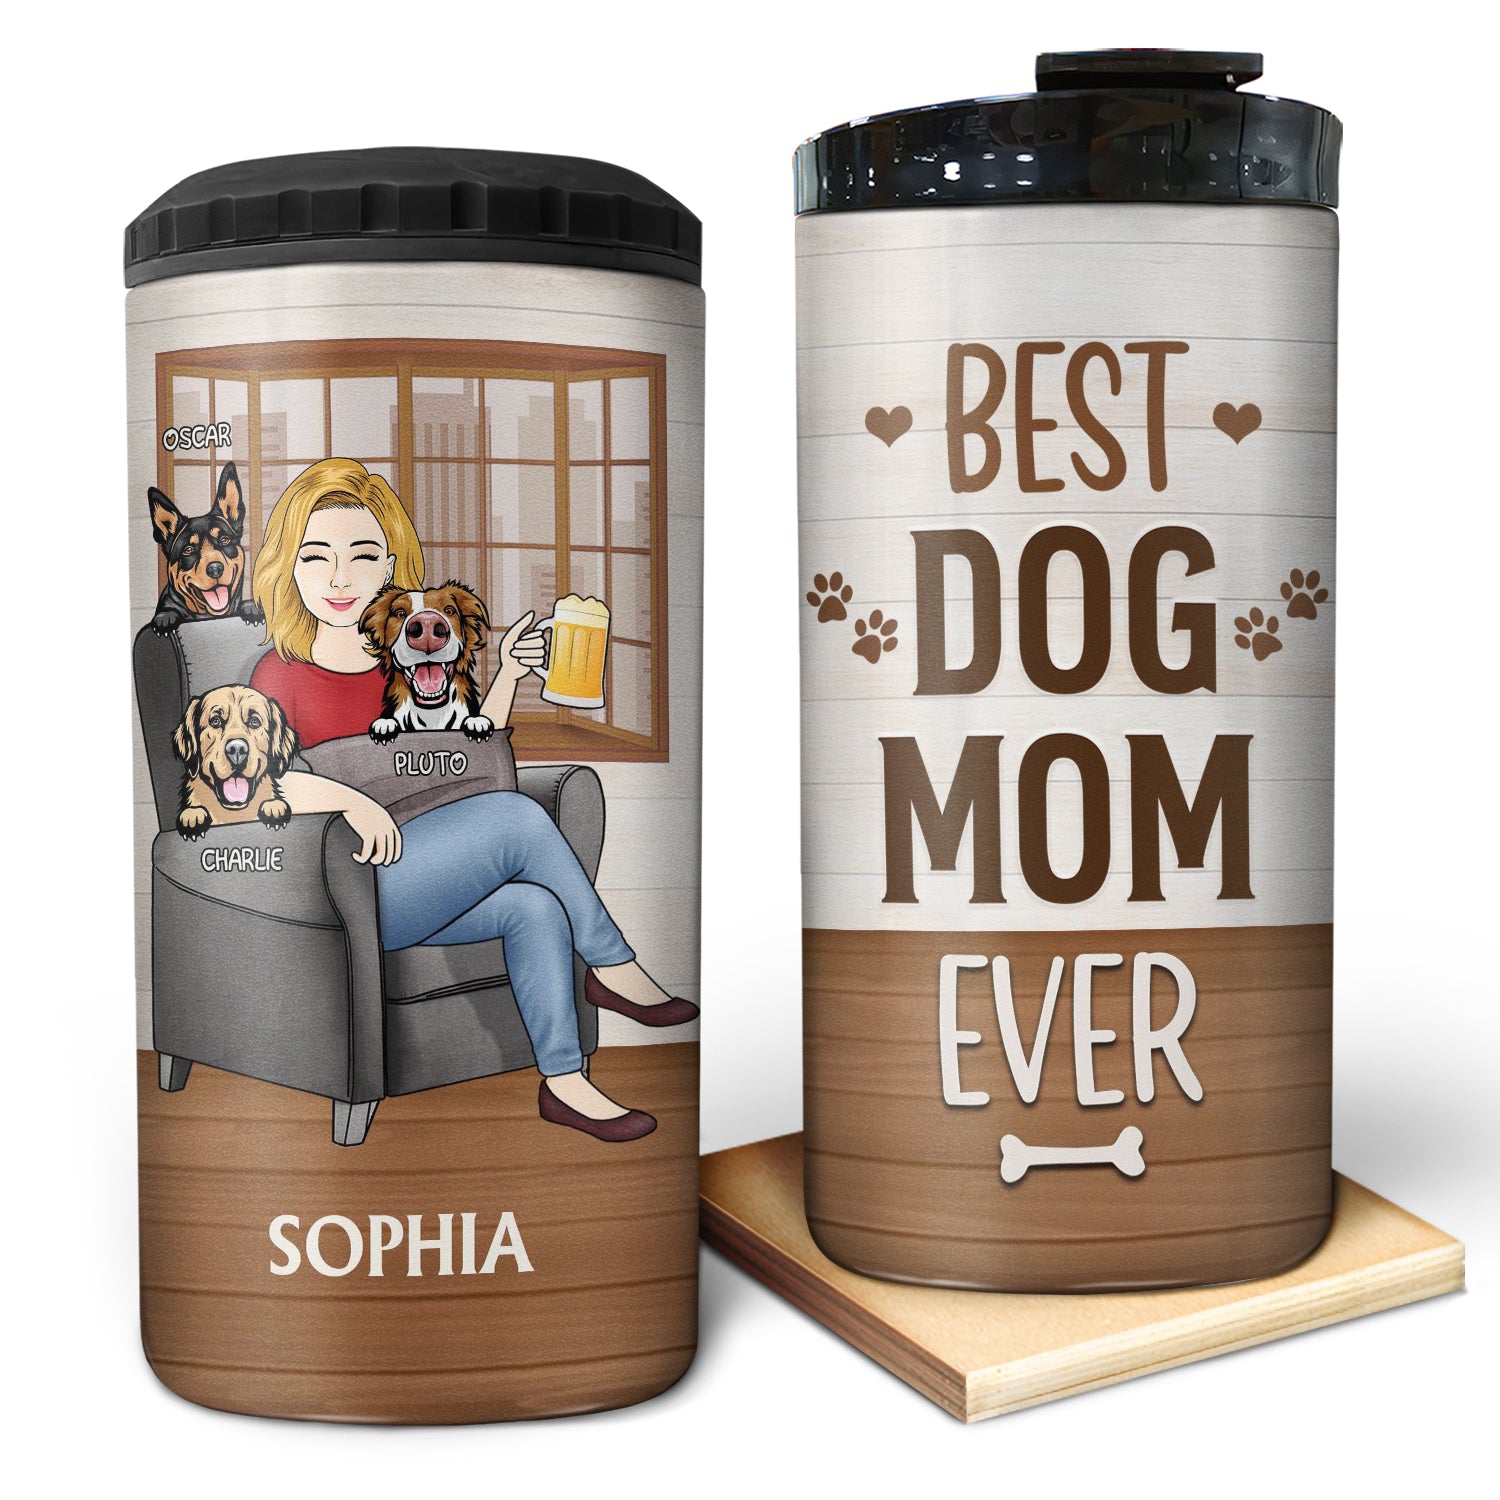 Thank You Best Dog Mom Ever - Birthday, Anniversary Gift For Dog Lover, Woman Who Loves Dogs - Personalized 4 In 1 Can Cooler Tumbler